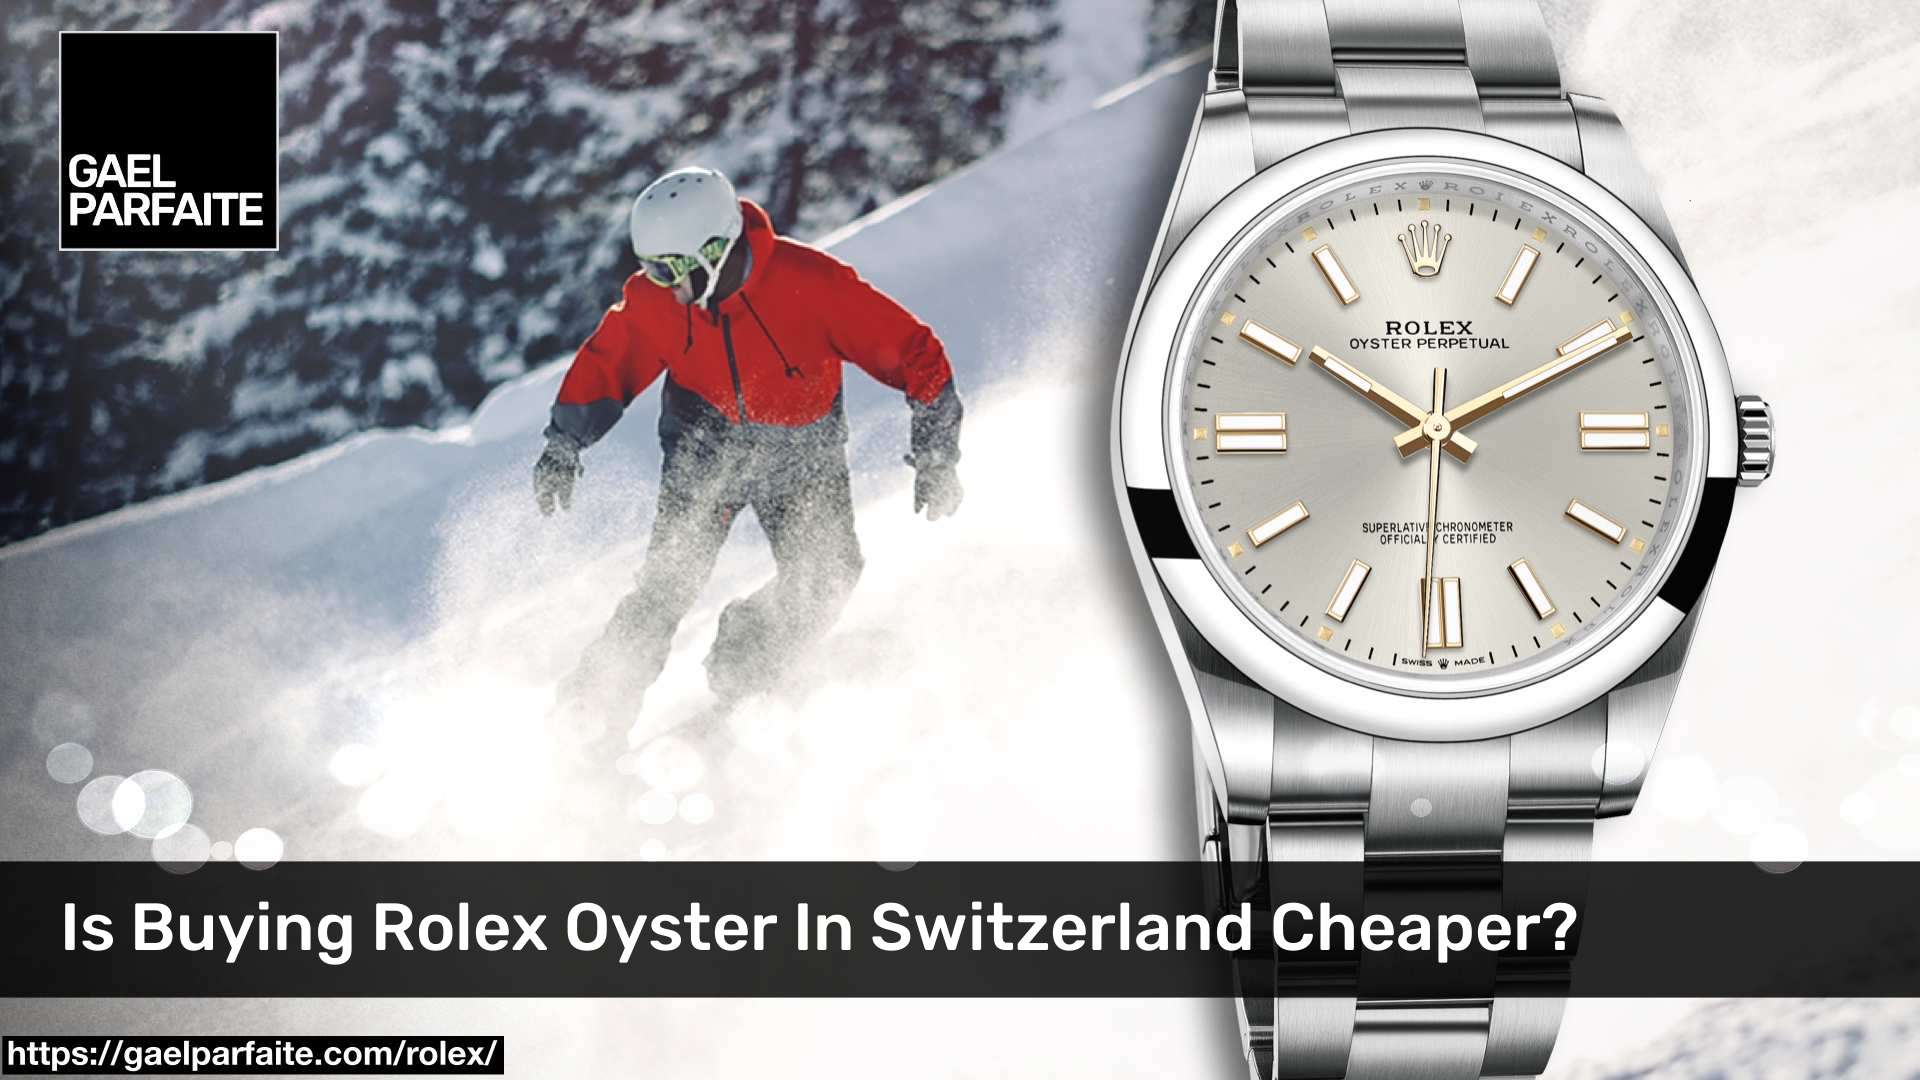 Is Buying Rolex Oyster In Switzerland Cheaper?